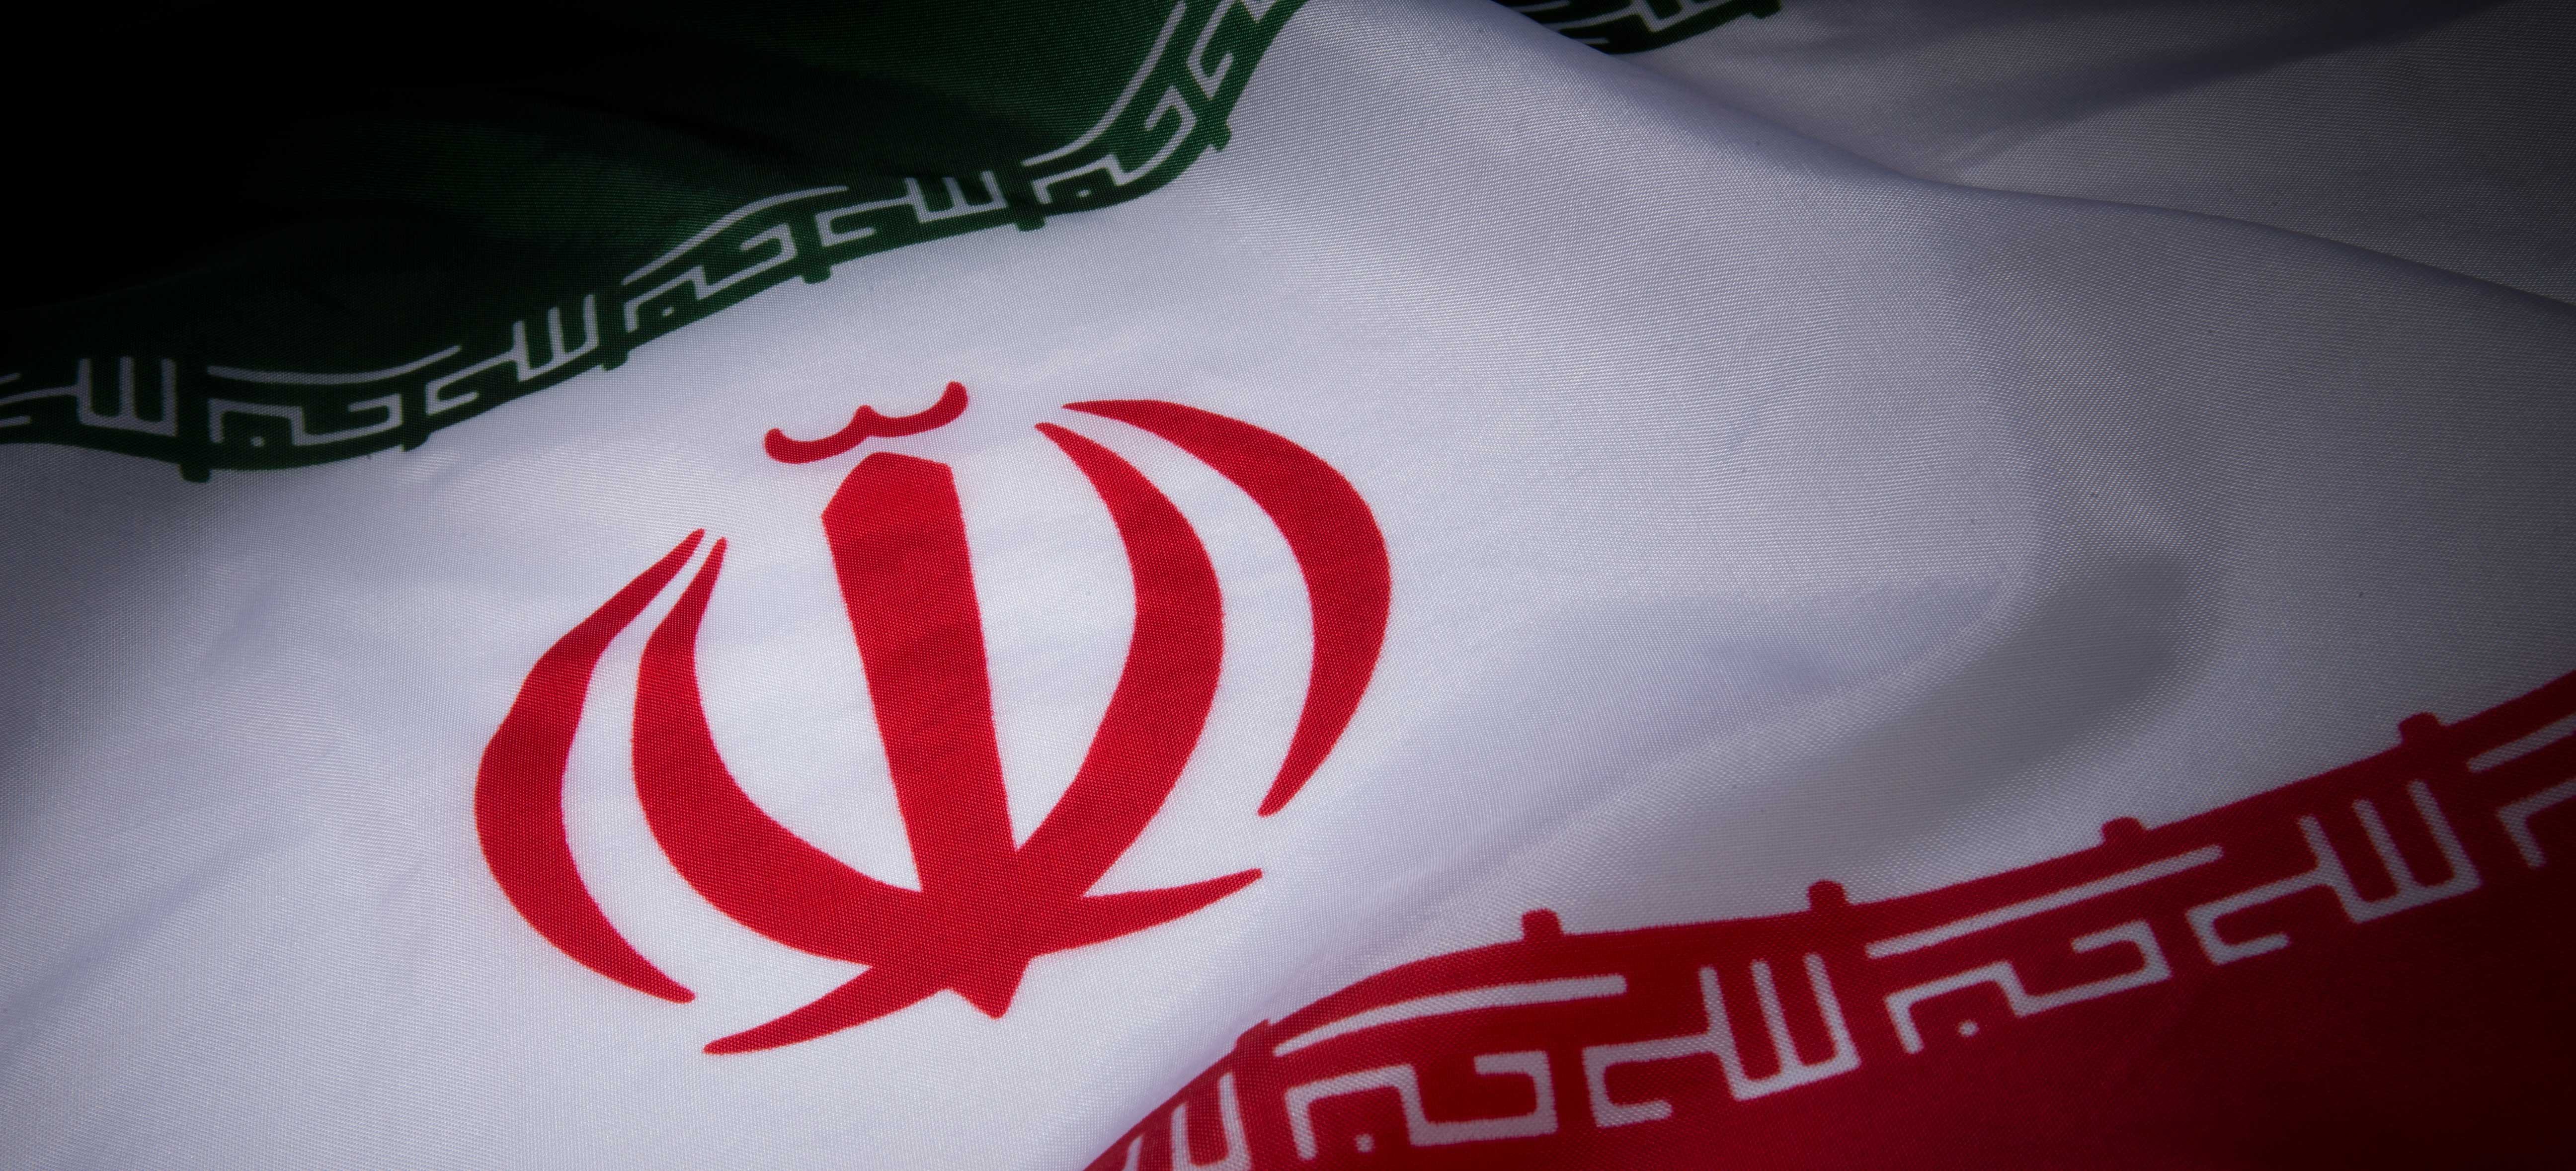 misc, flag of iran, flag, flags